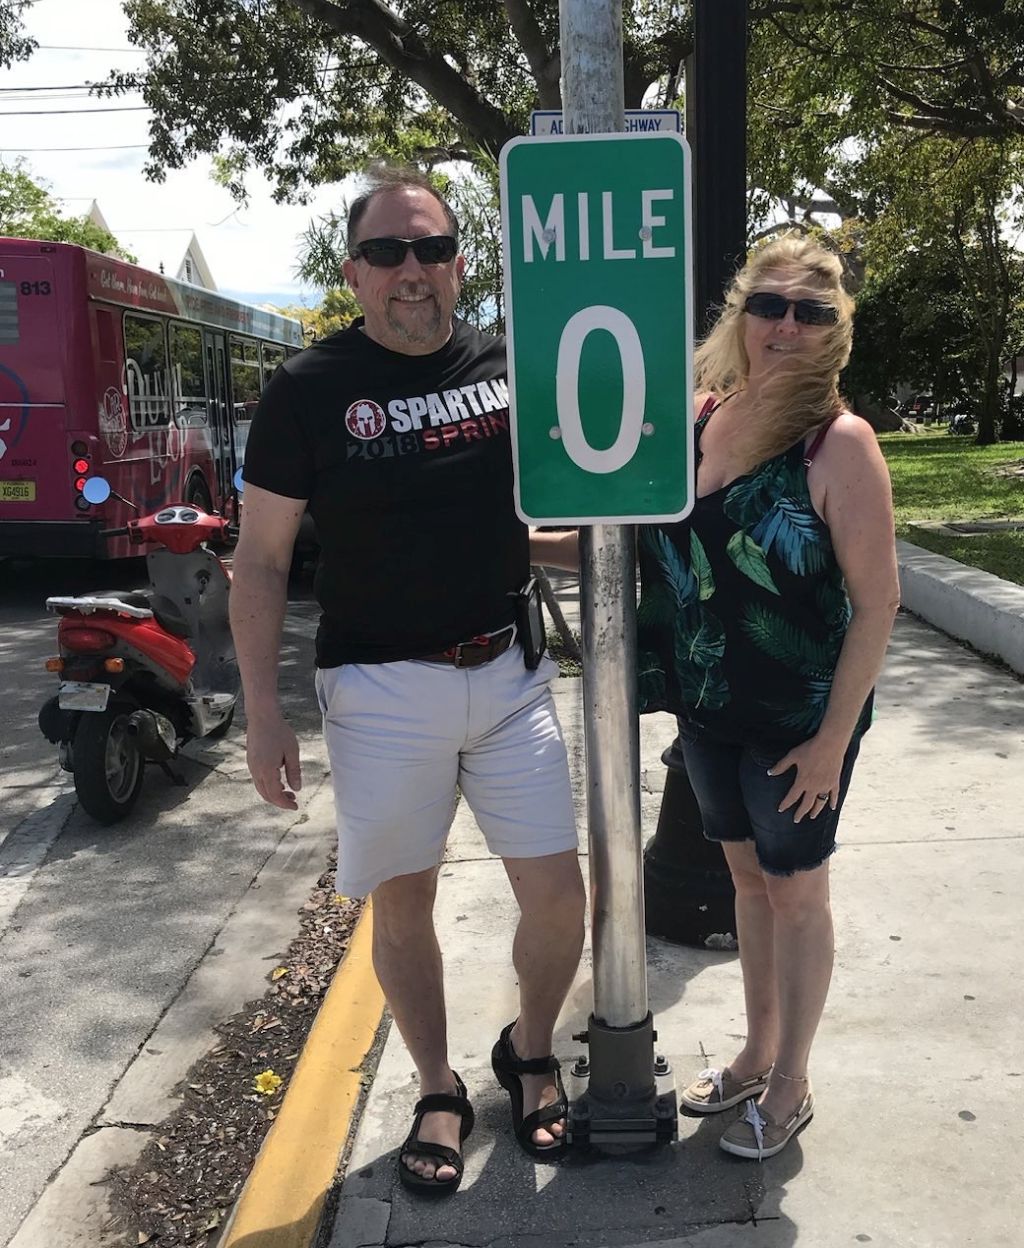 A couple wearing sunglasses pose on either side of the Mile 0 sign in Key West, Florida